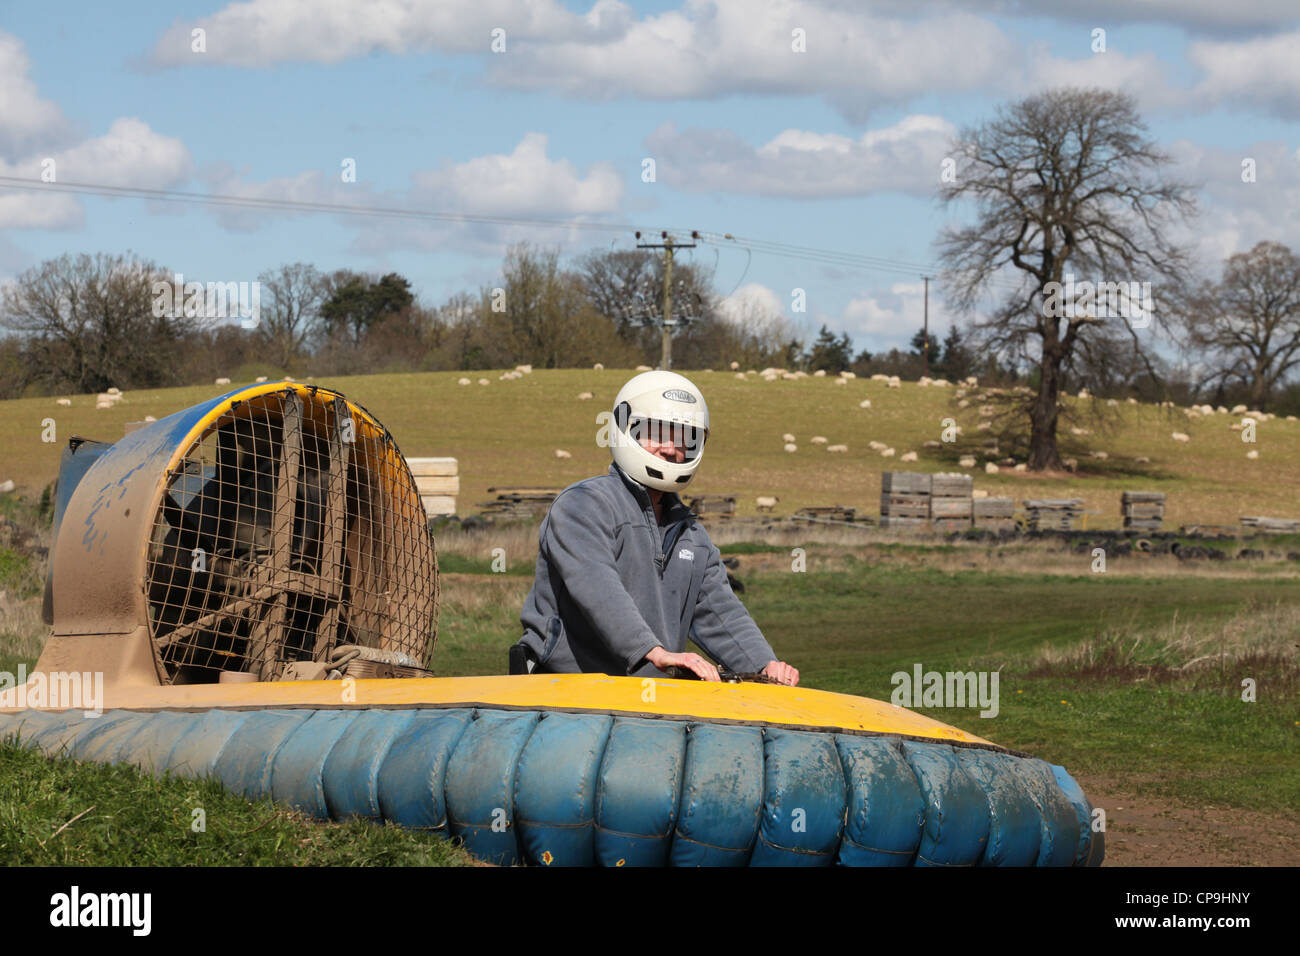 Man riding around a race course on a miniature hovercraft. The novel vehicle is popular as part of mens groups and stag parties. Stock Photo